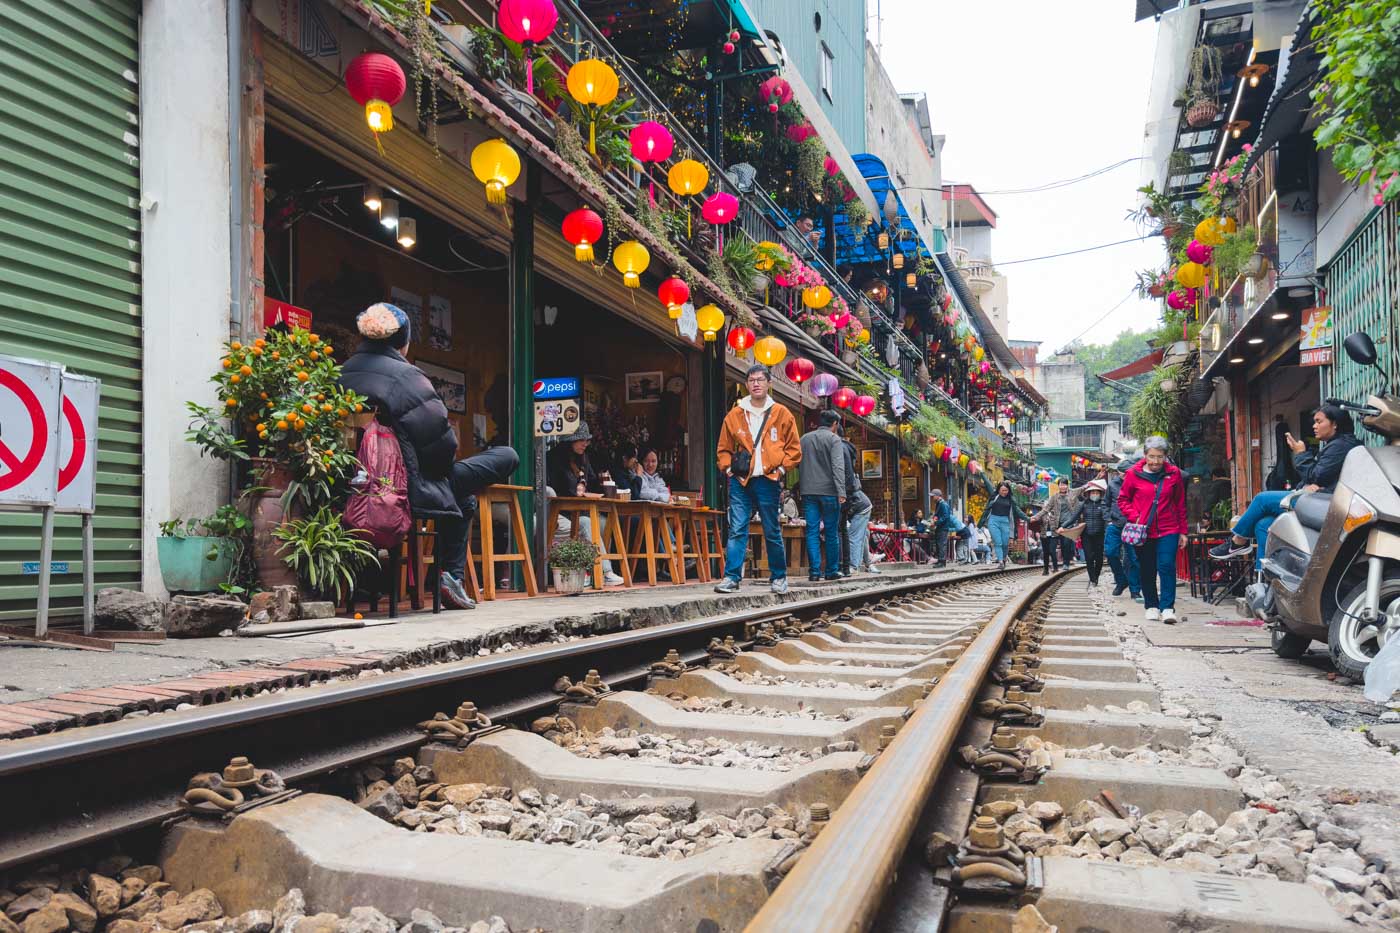 Low angle of the train tracks at Hanoi Train Street while people walk up and down them.